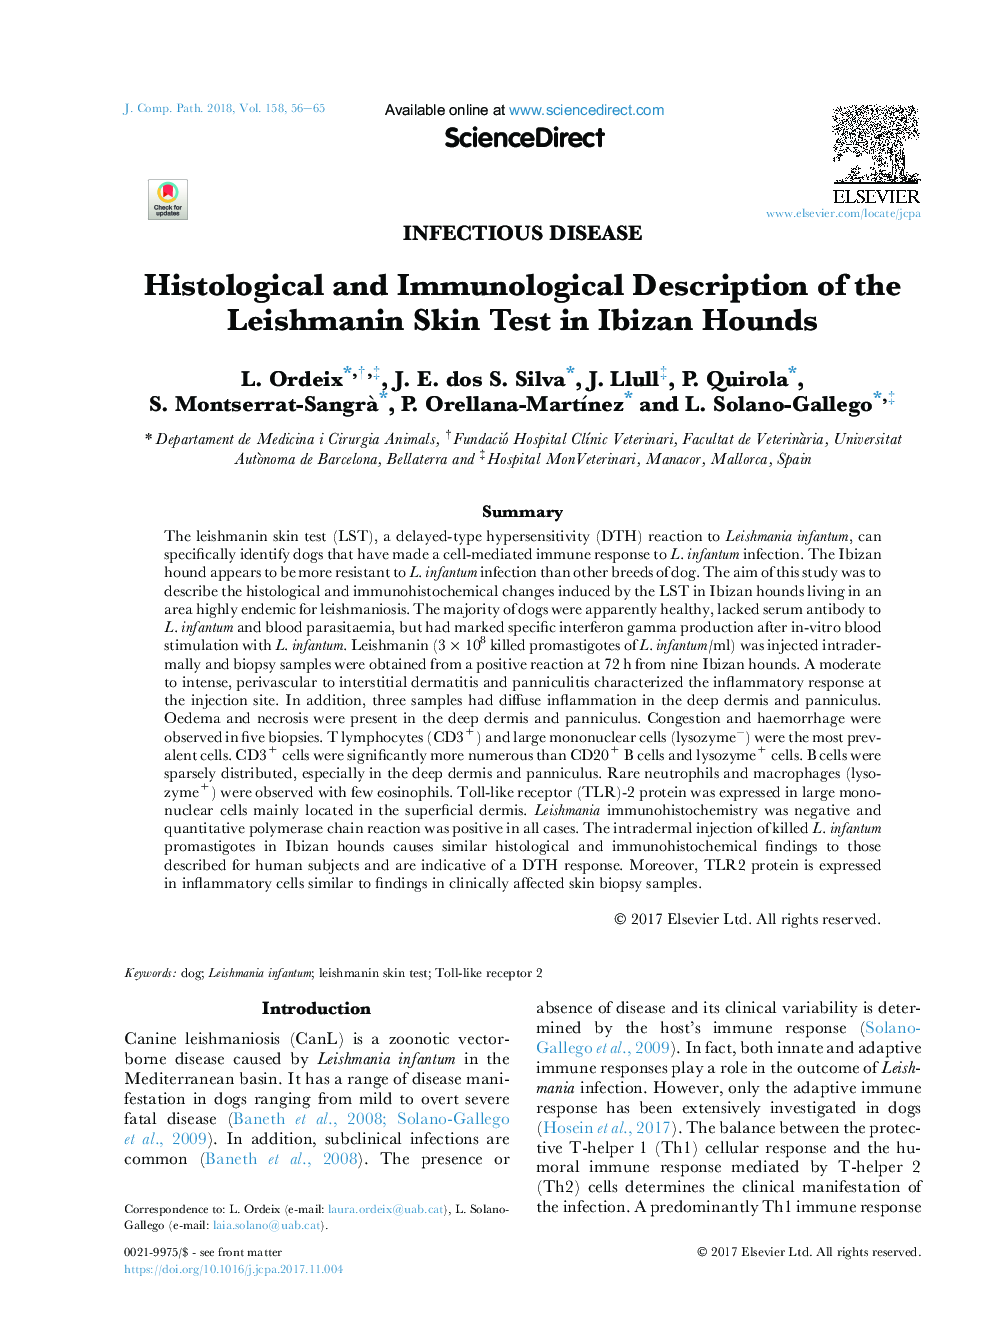 Histological and Immunological Description of the Leishmanin Skin Test in Ibizan Hounds